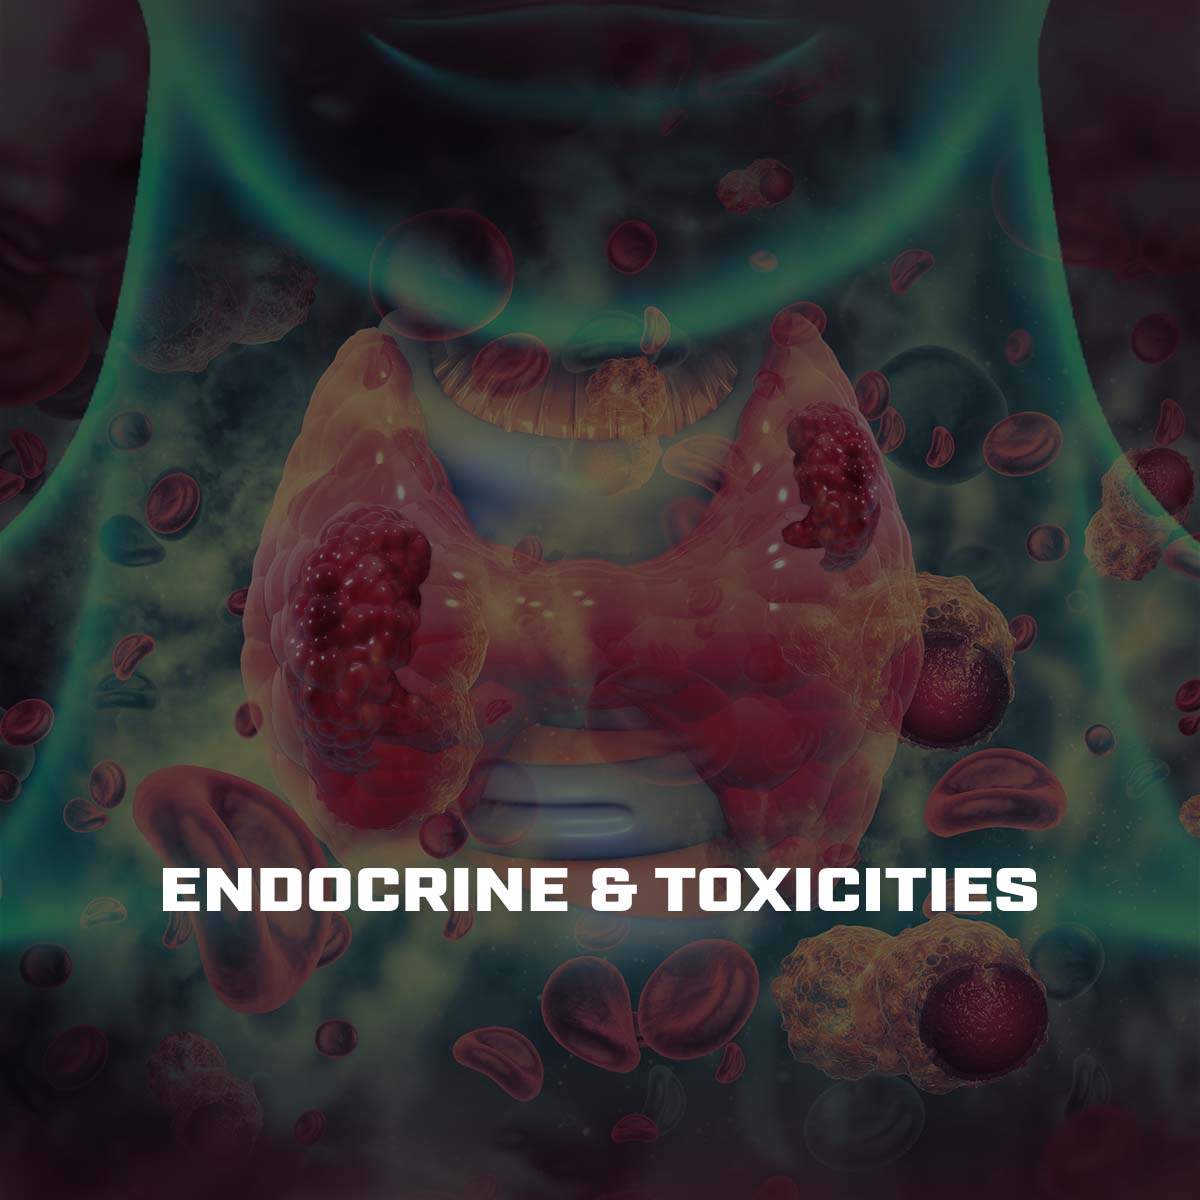 Endocrine & Toxicities Podcast Subscription